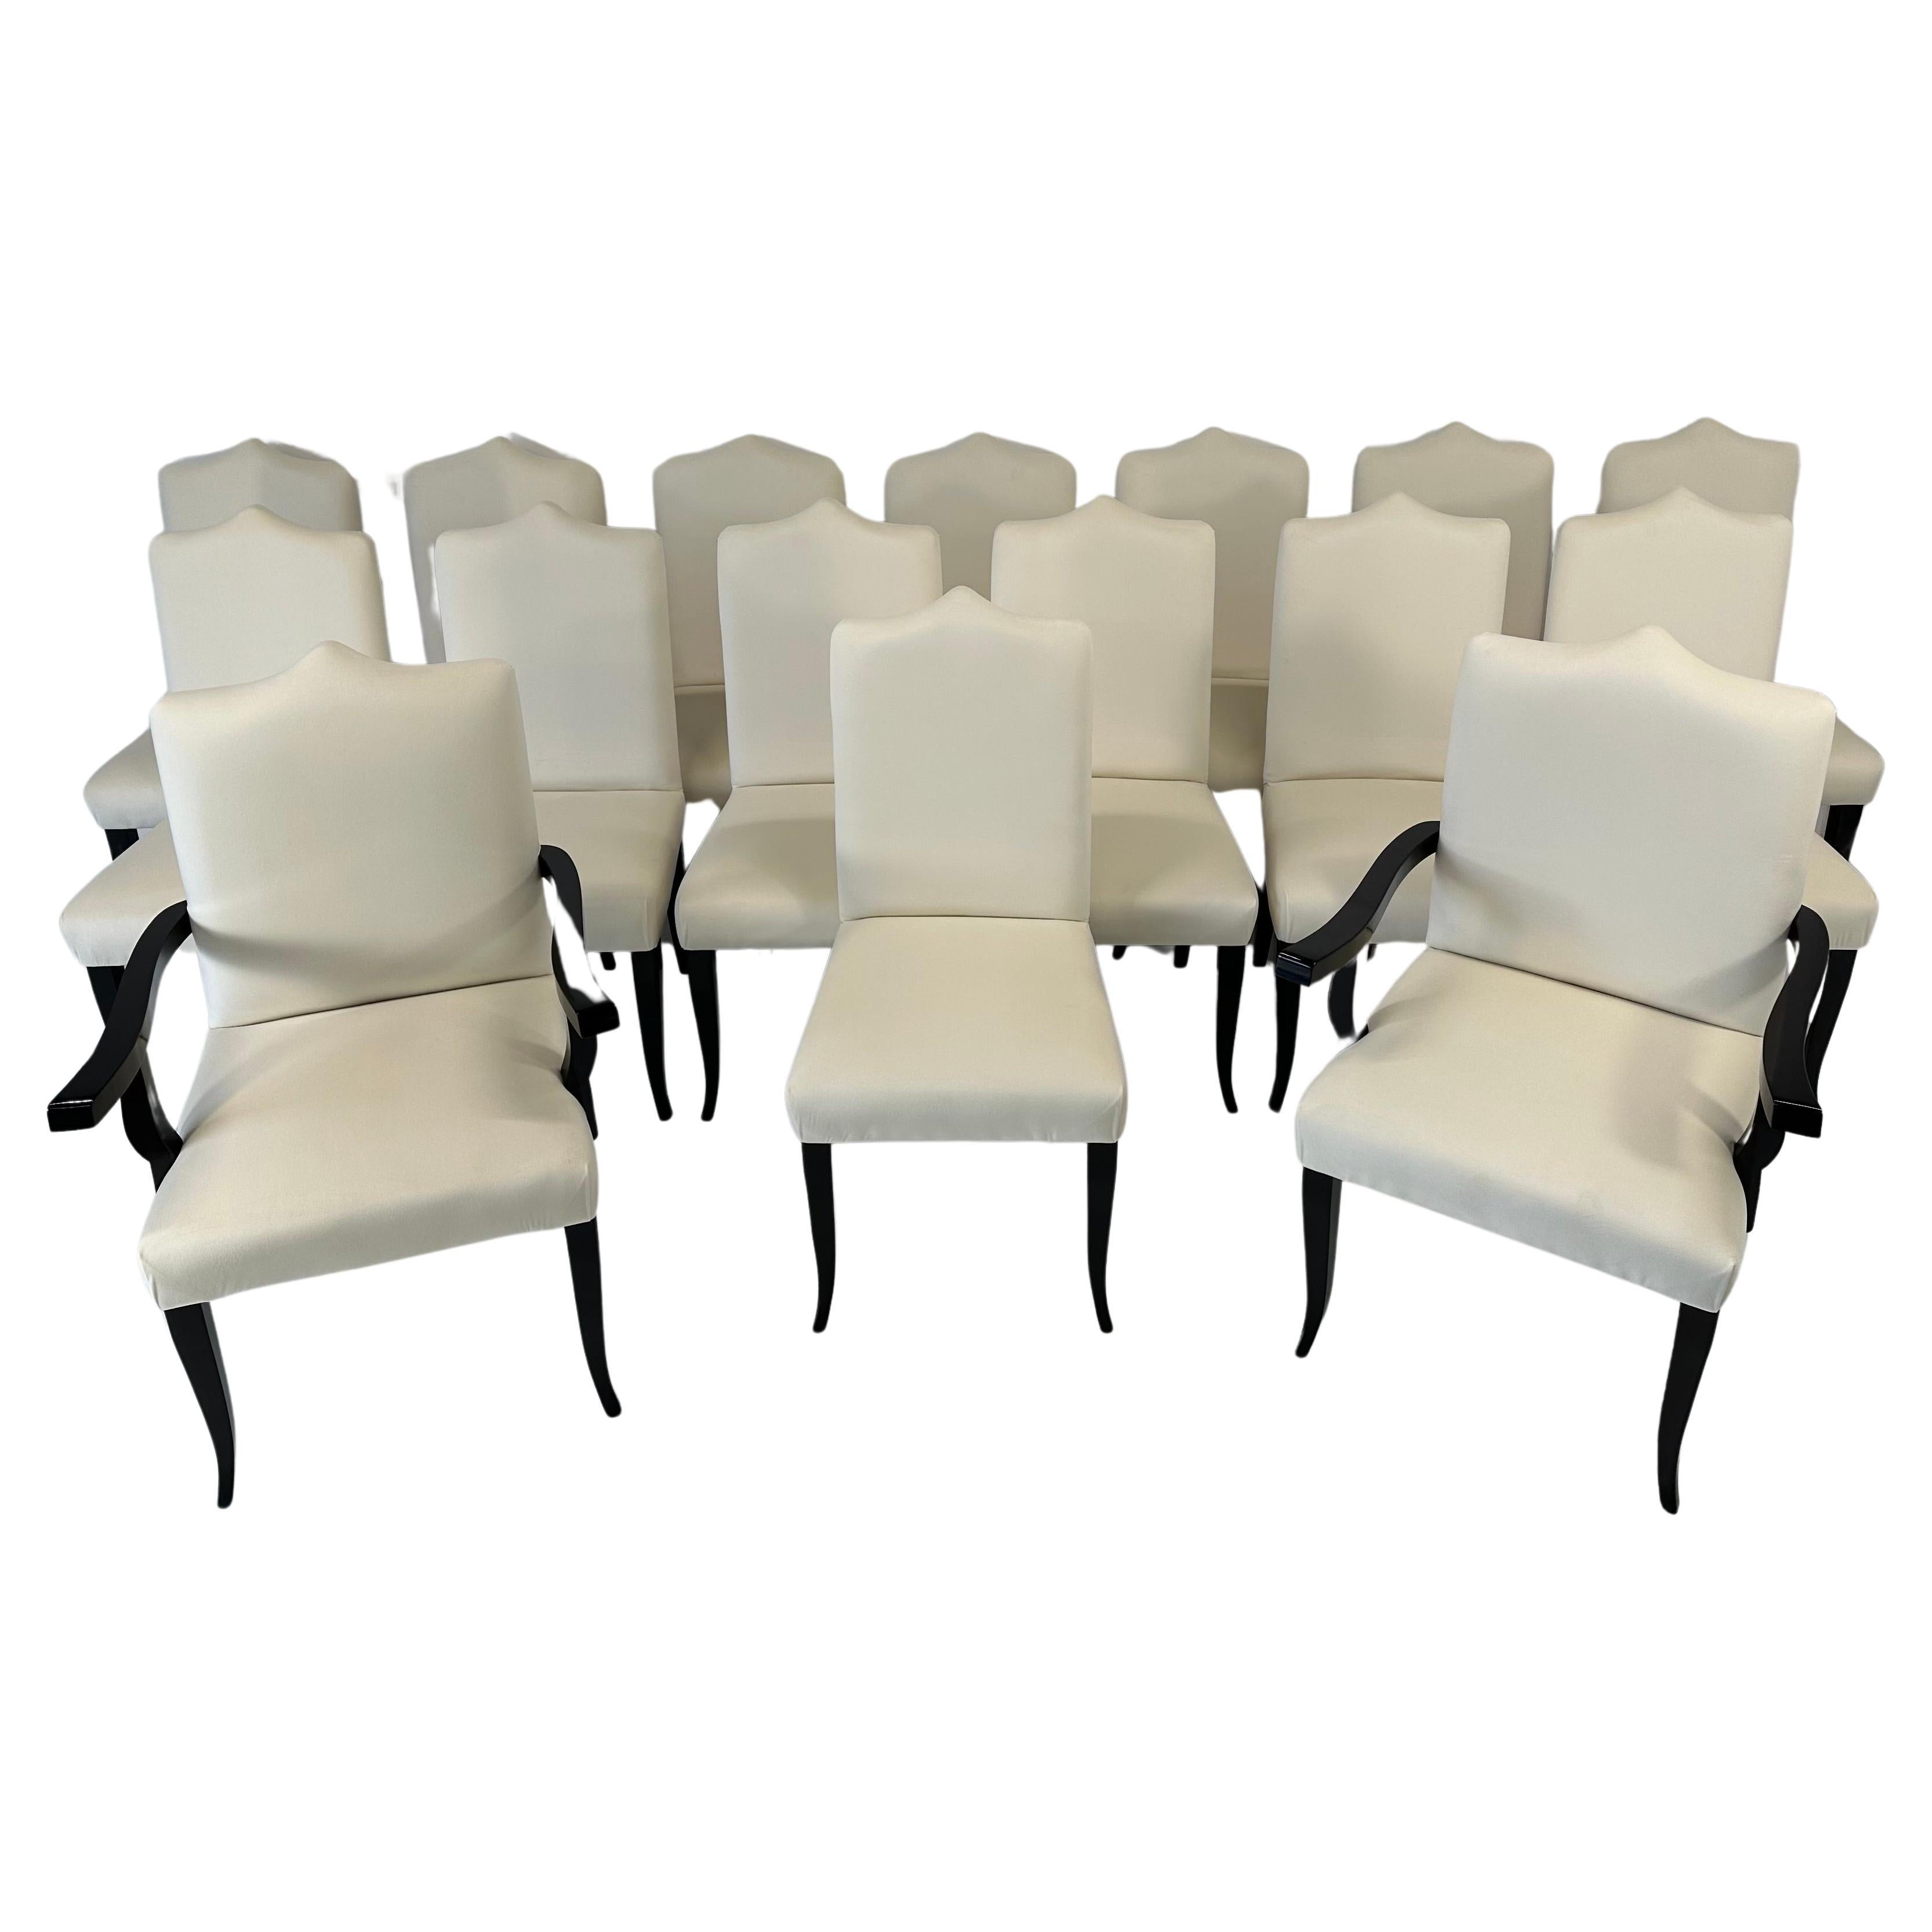 Italian Art Deco Style Set of 16 Cream Velvet and Black Lacquered Chairs For Sale